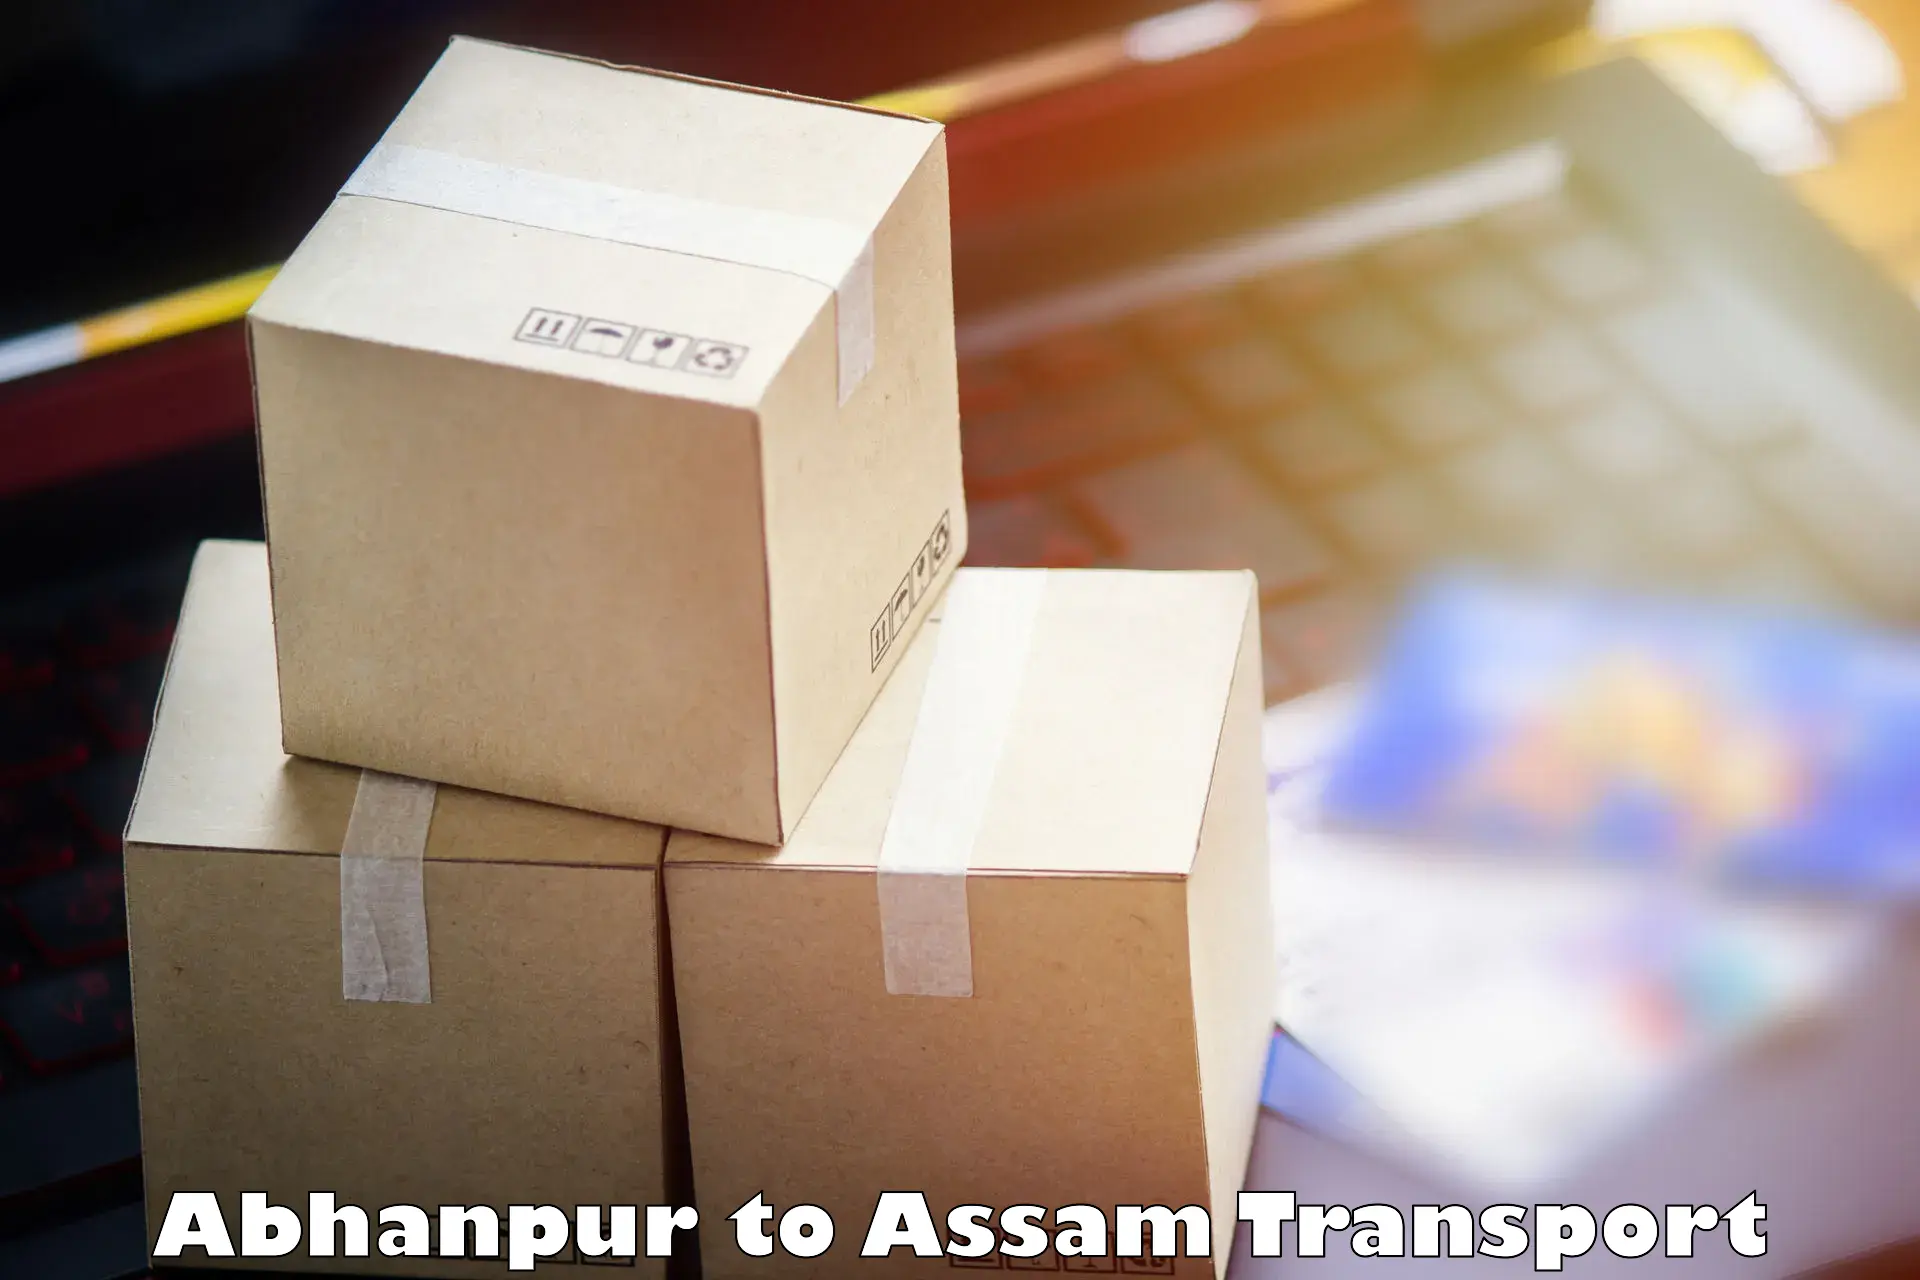 Air freight transport services in Abhanpur to Jagiroad